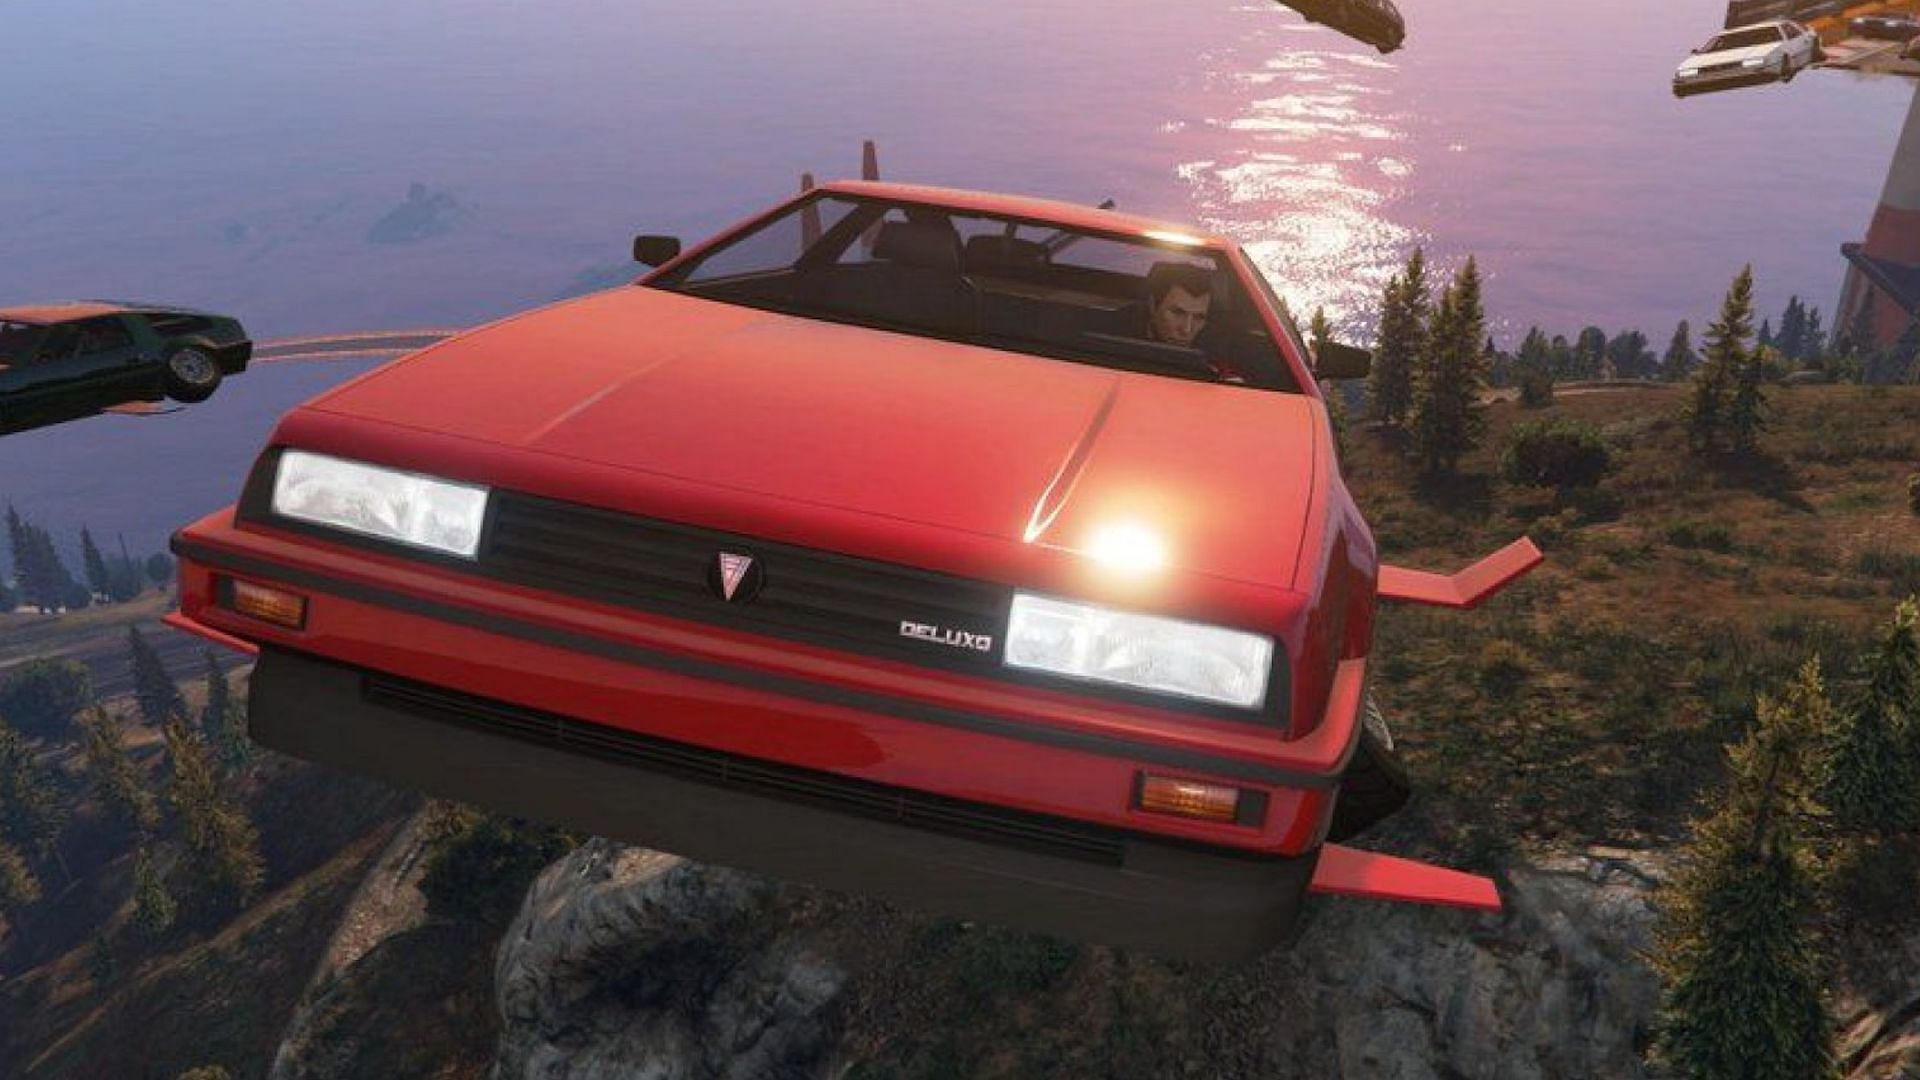 The Deluxo is a good example of something that